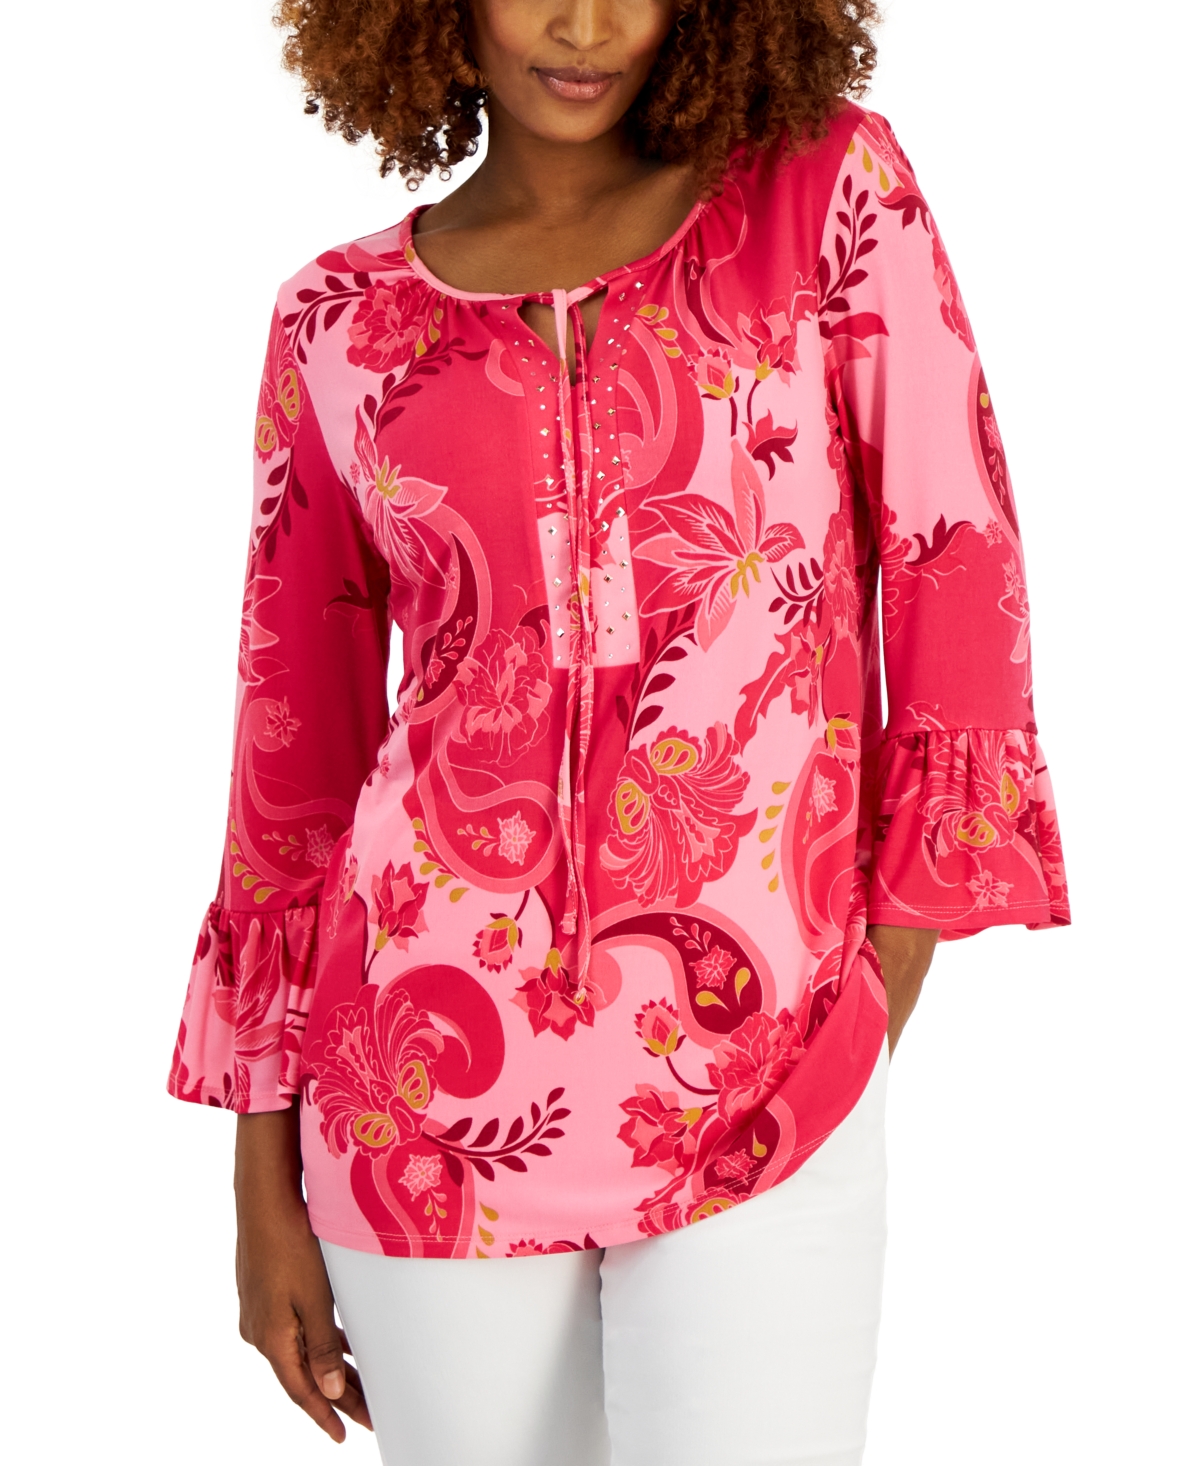 Women's Printed Embellished Tunic with Ruffle Sleeves, Created for Macy's - Claret Rose Combo